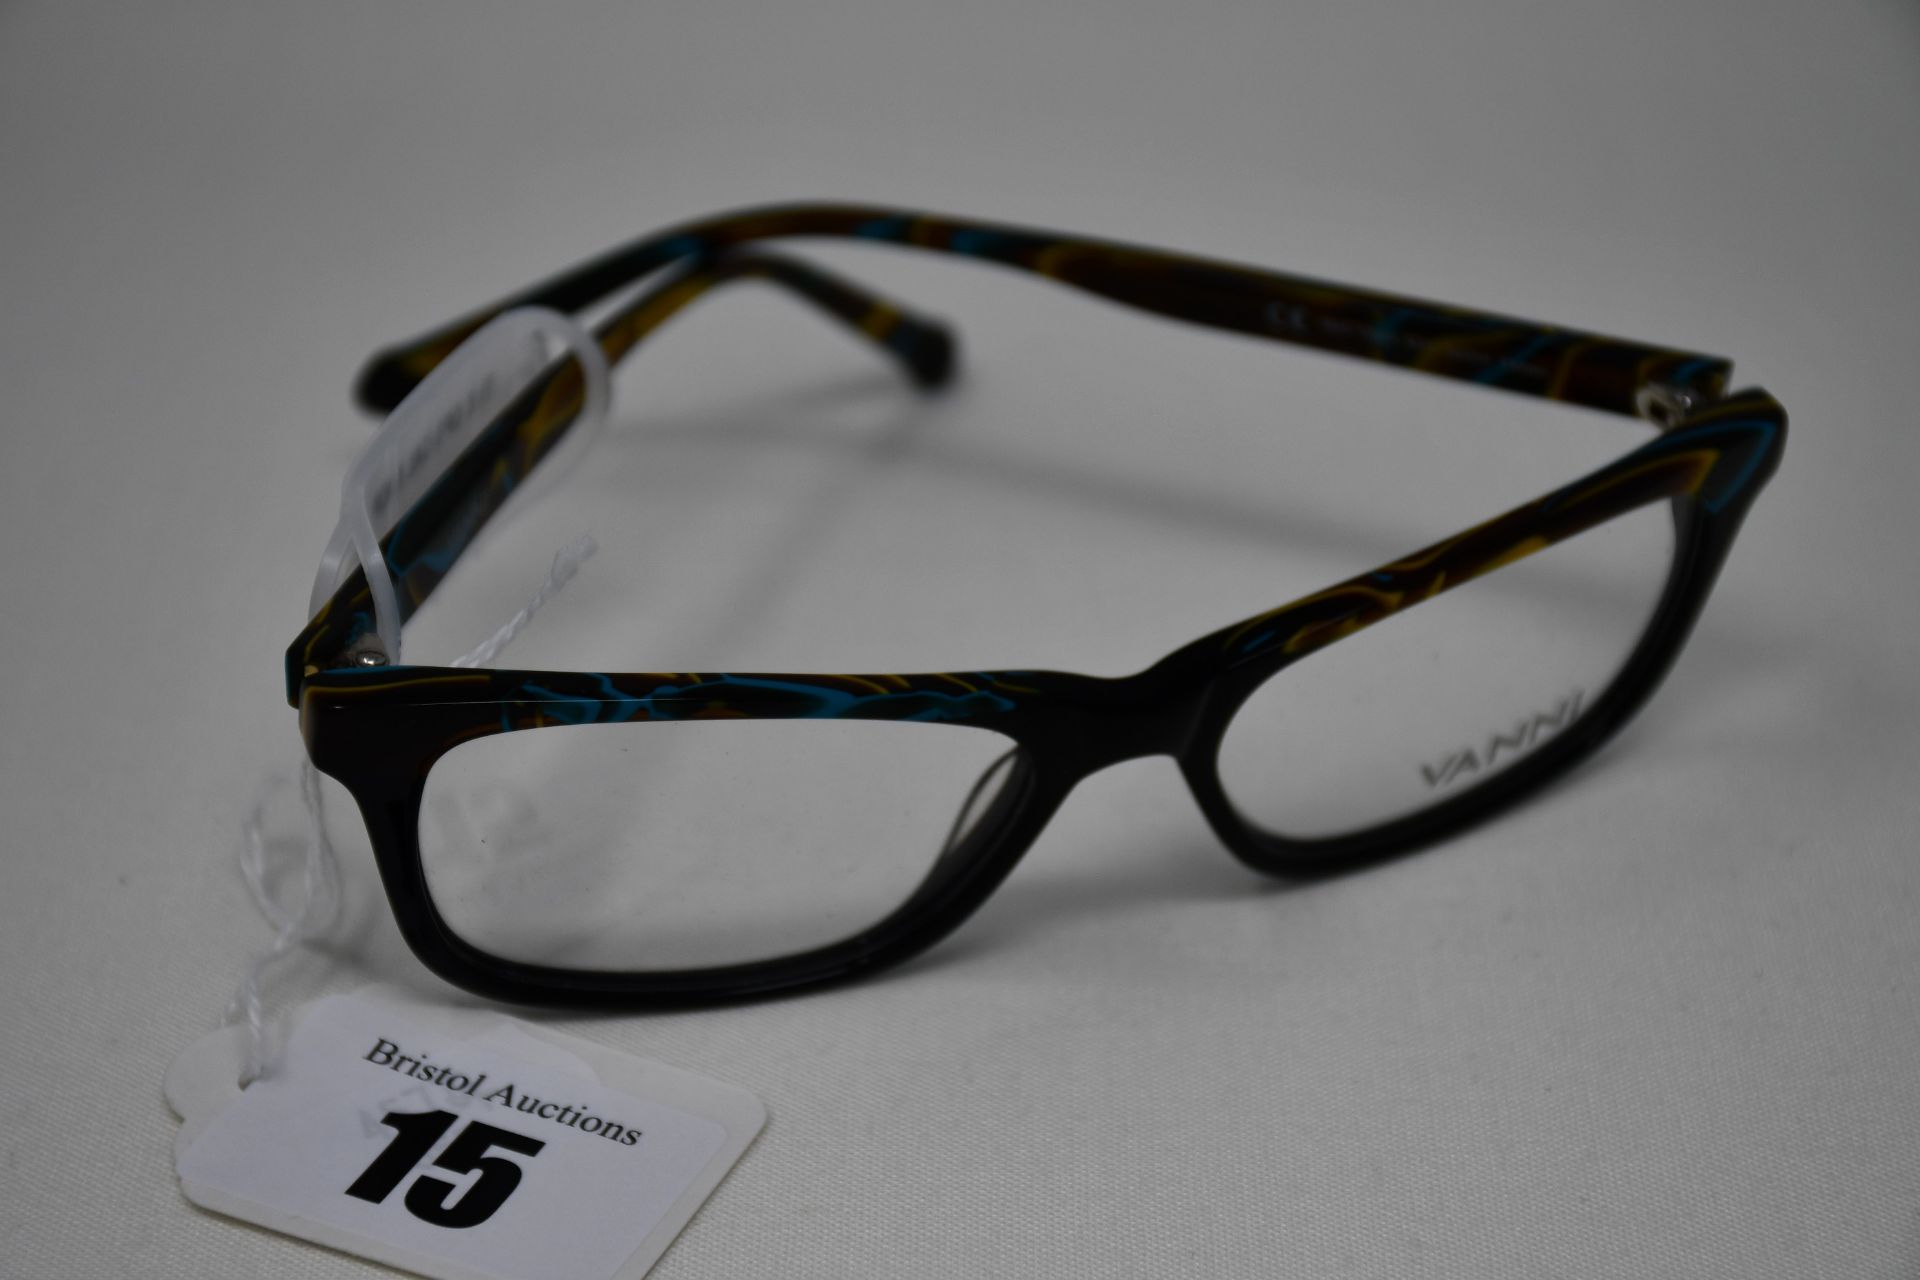 A pair of as new Vanni glasses frames with clear glass (RRP £240).